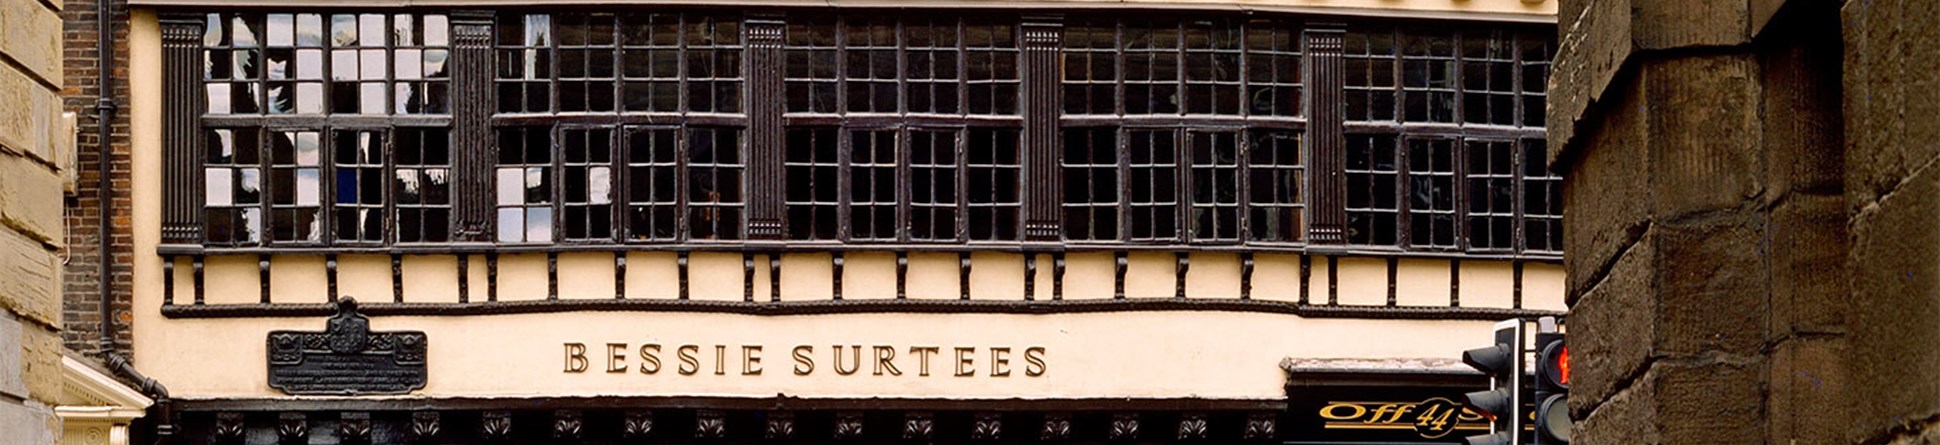 Exterior view of Bessie Surtees House from Watergate lane